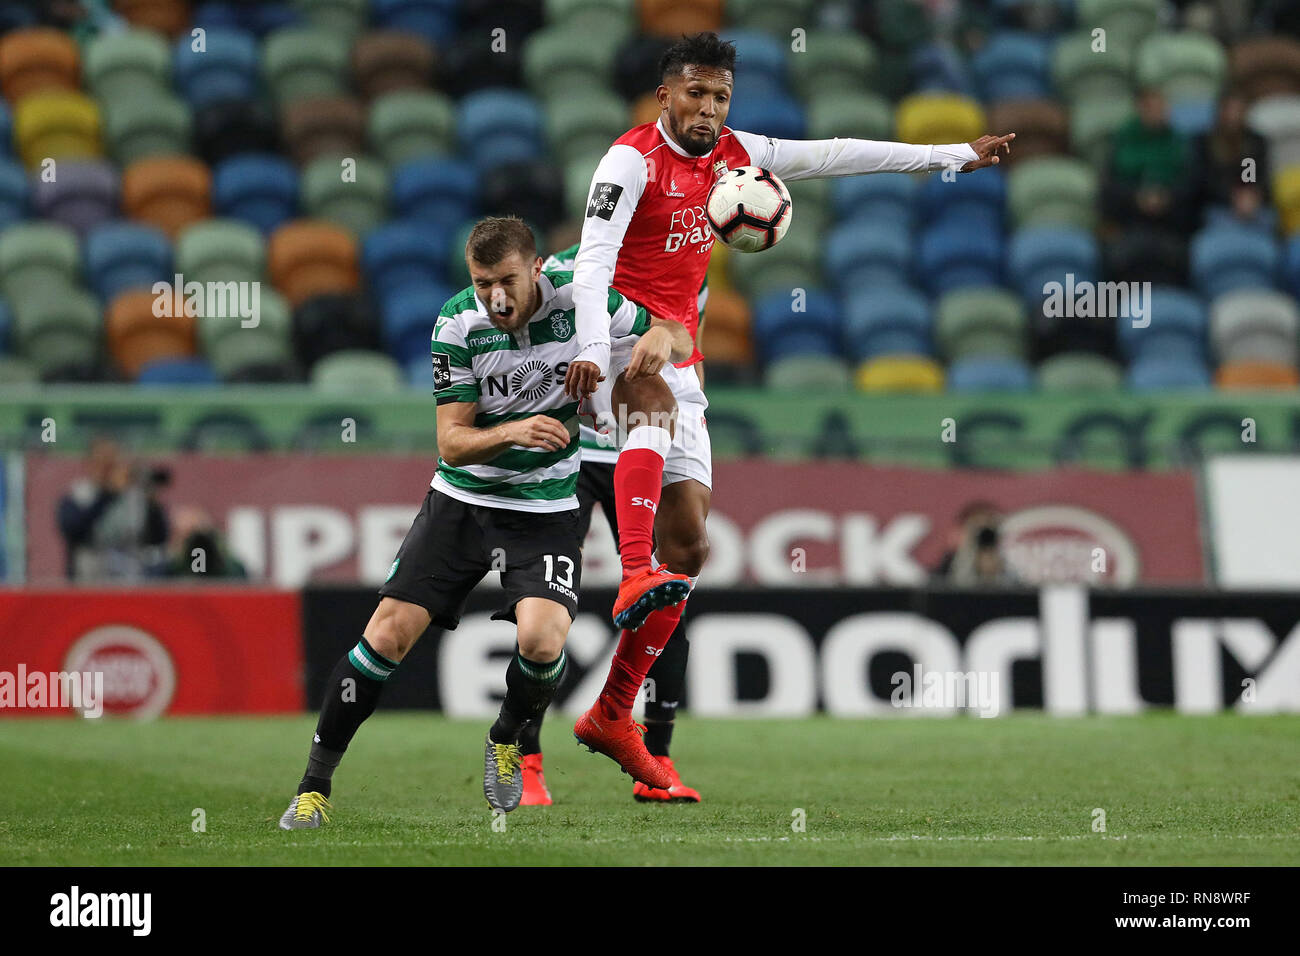 Stefan Ristovski of Sporting CP (L) vies for the ball with Dyego Sousa of SC Braga (R) during the League NOS 2018/19 footballl match between Sporting CP vs SC Braga.  (Final score: Sporting CP 3 - 0 SC Braga) Stock Photo